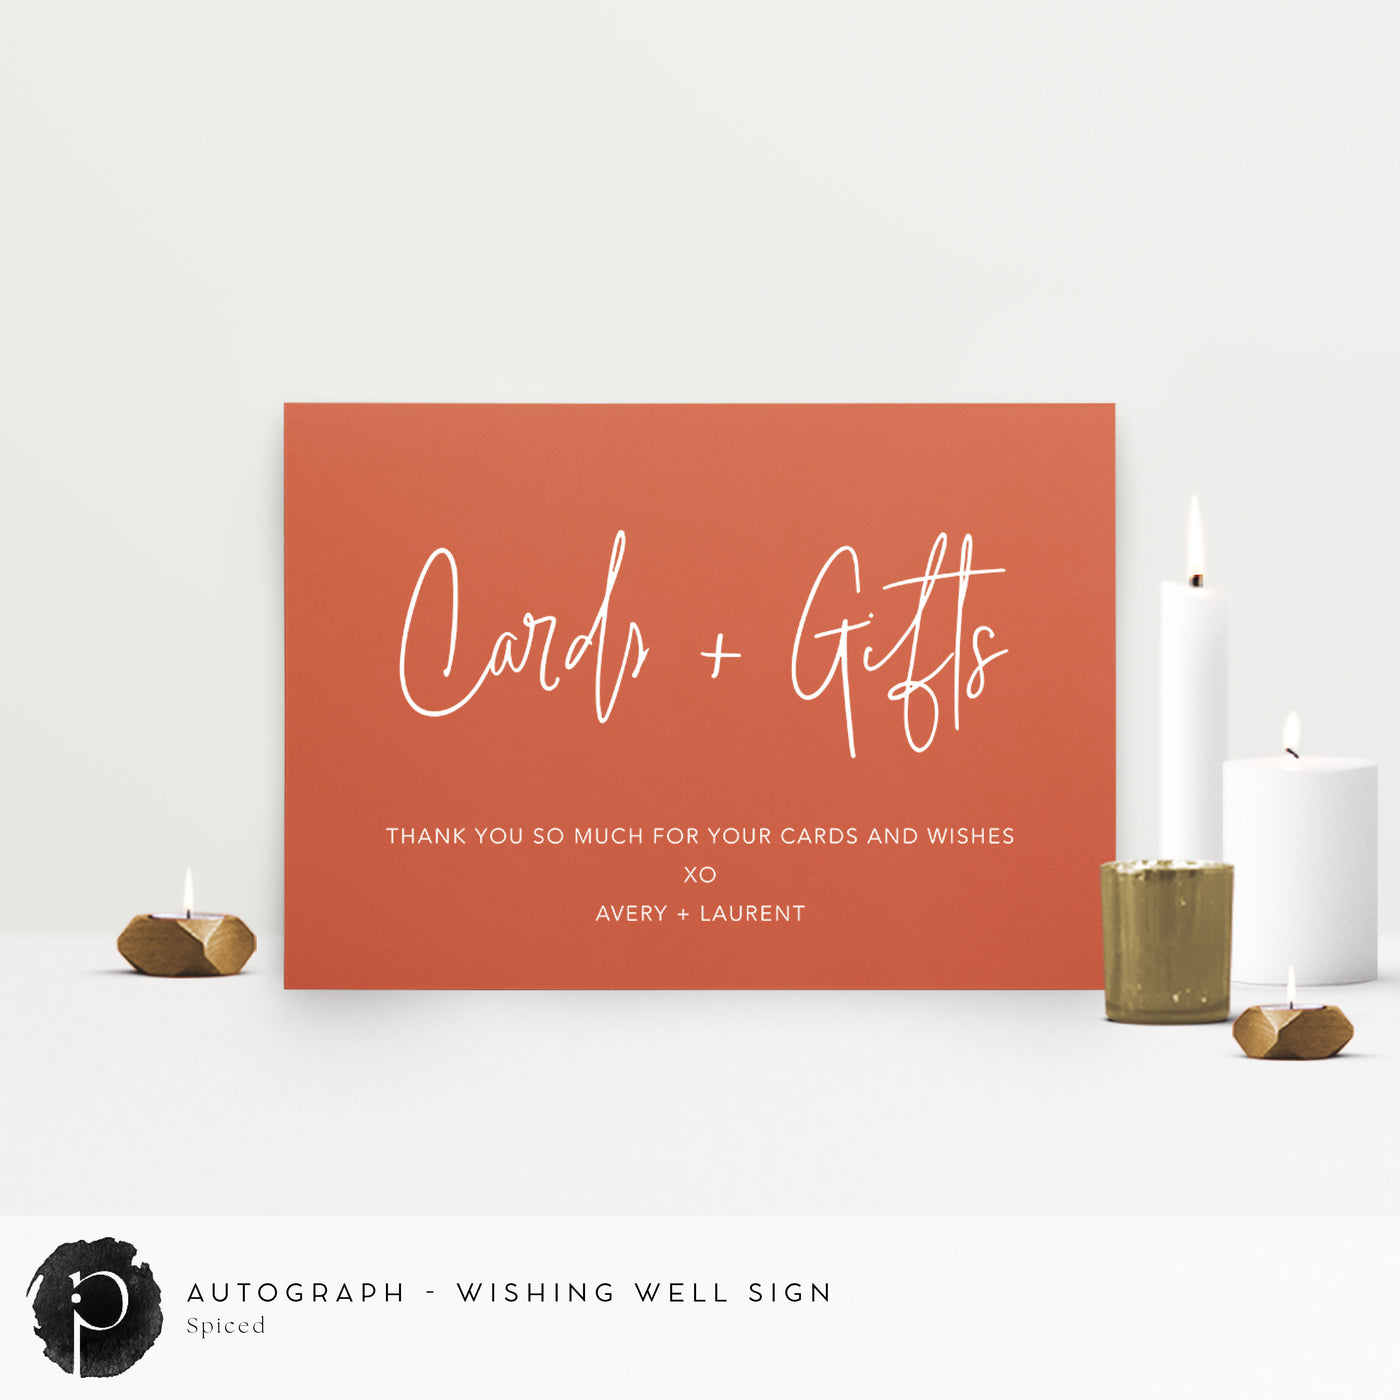 Autograph - Cards/Gifts/Presents/Wishing Well Table Sign